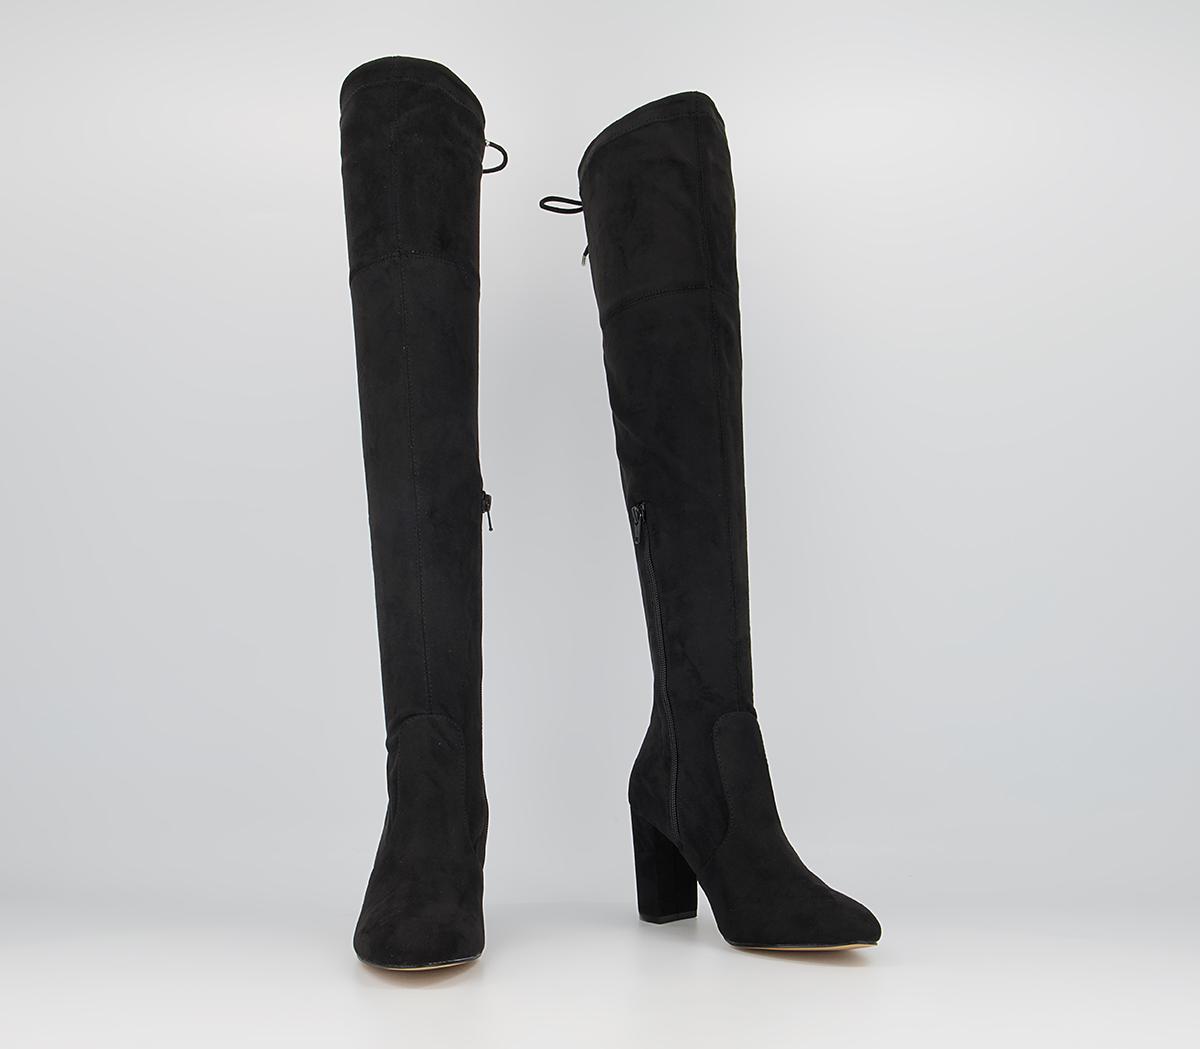 OFFICE Katie Over The Knee Stretch Boots Black - Knee High Boots